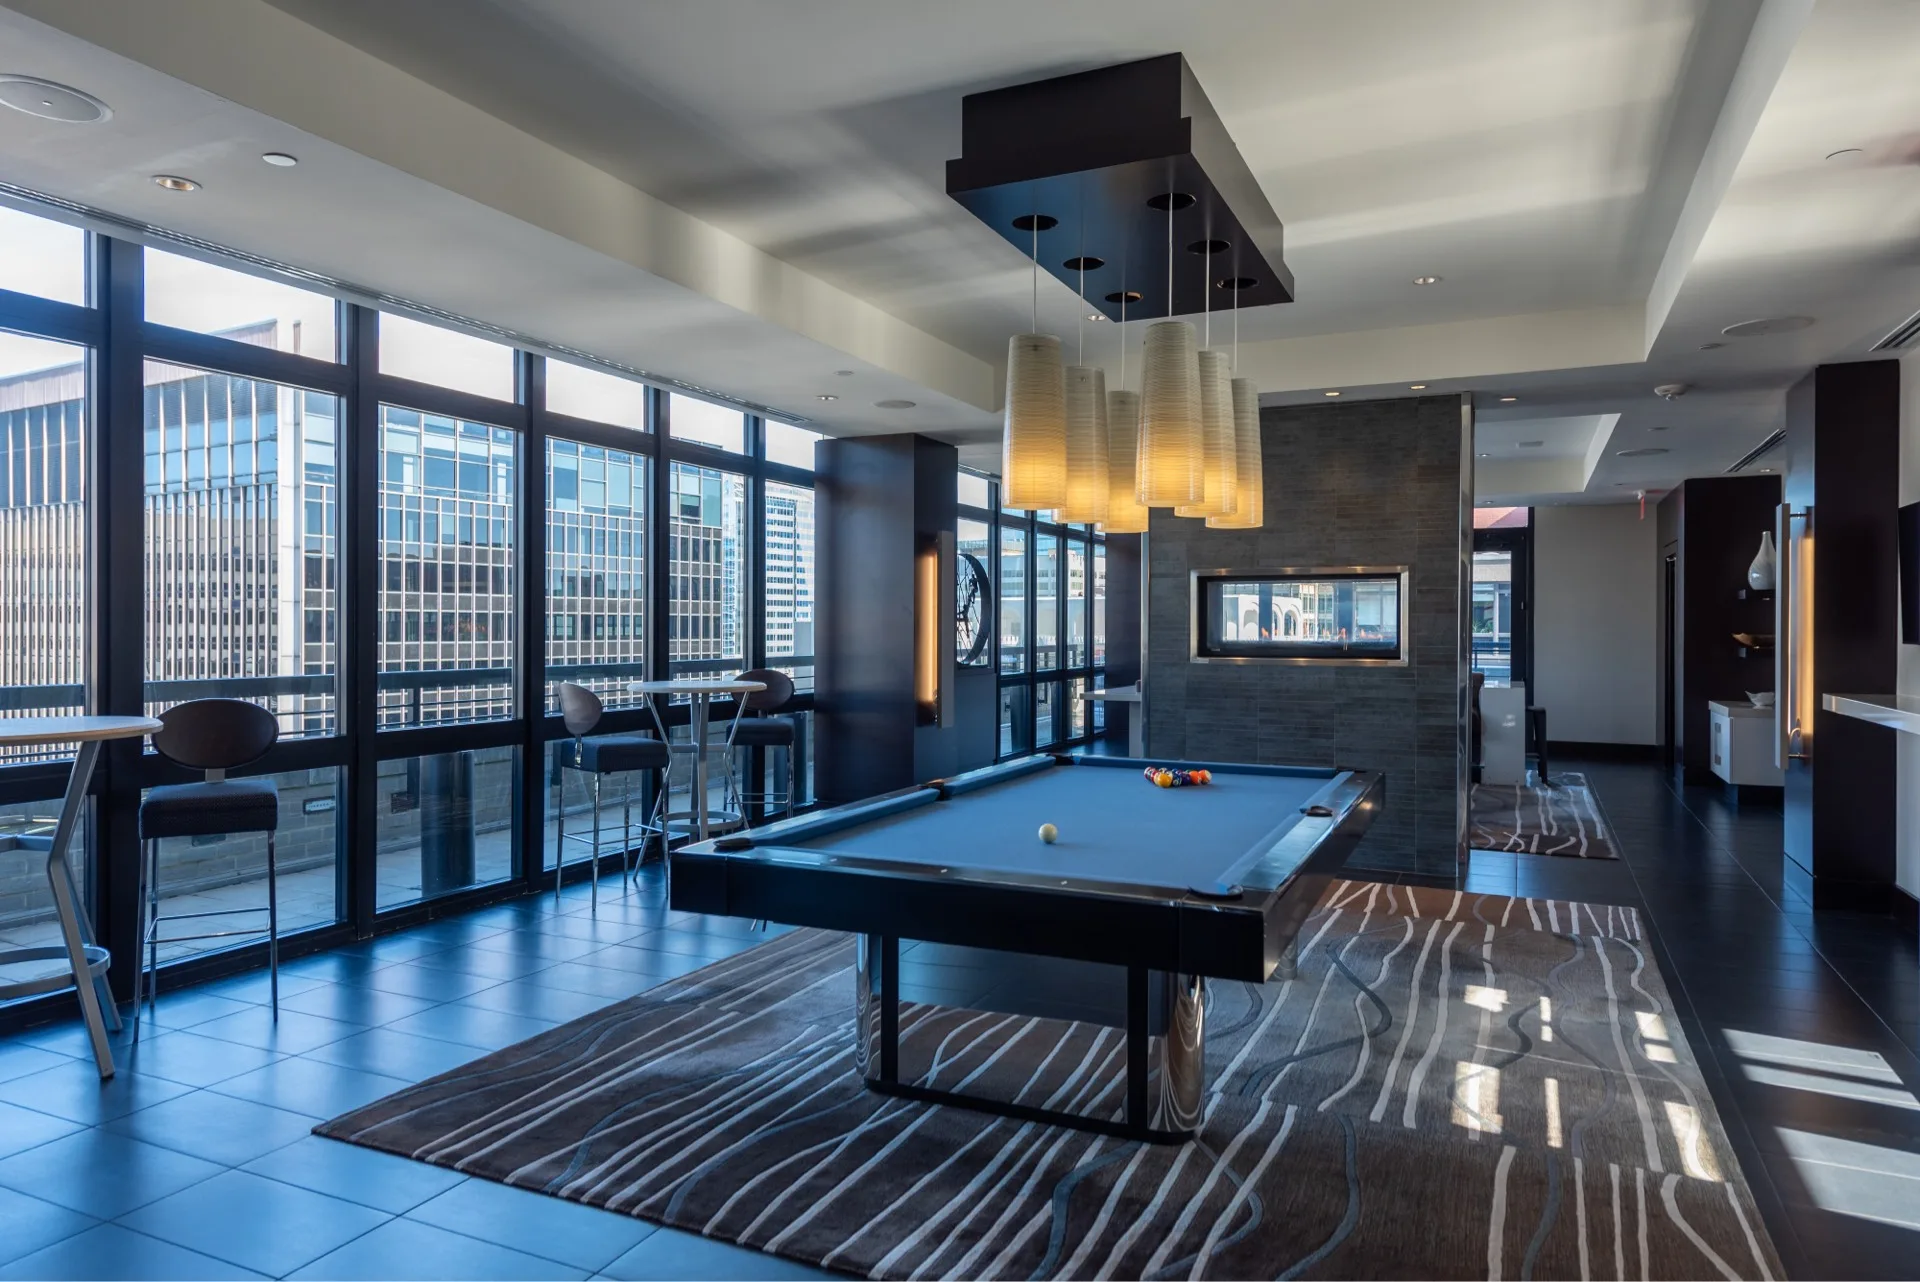 Pool table in rooftop lounge